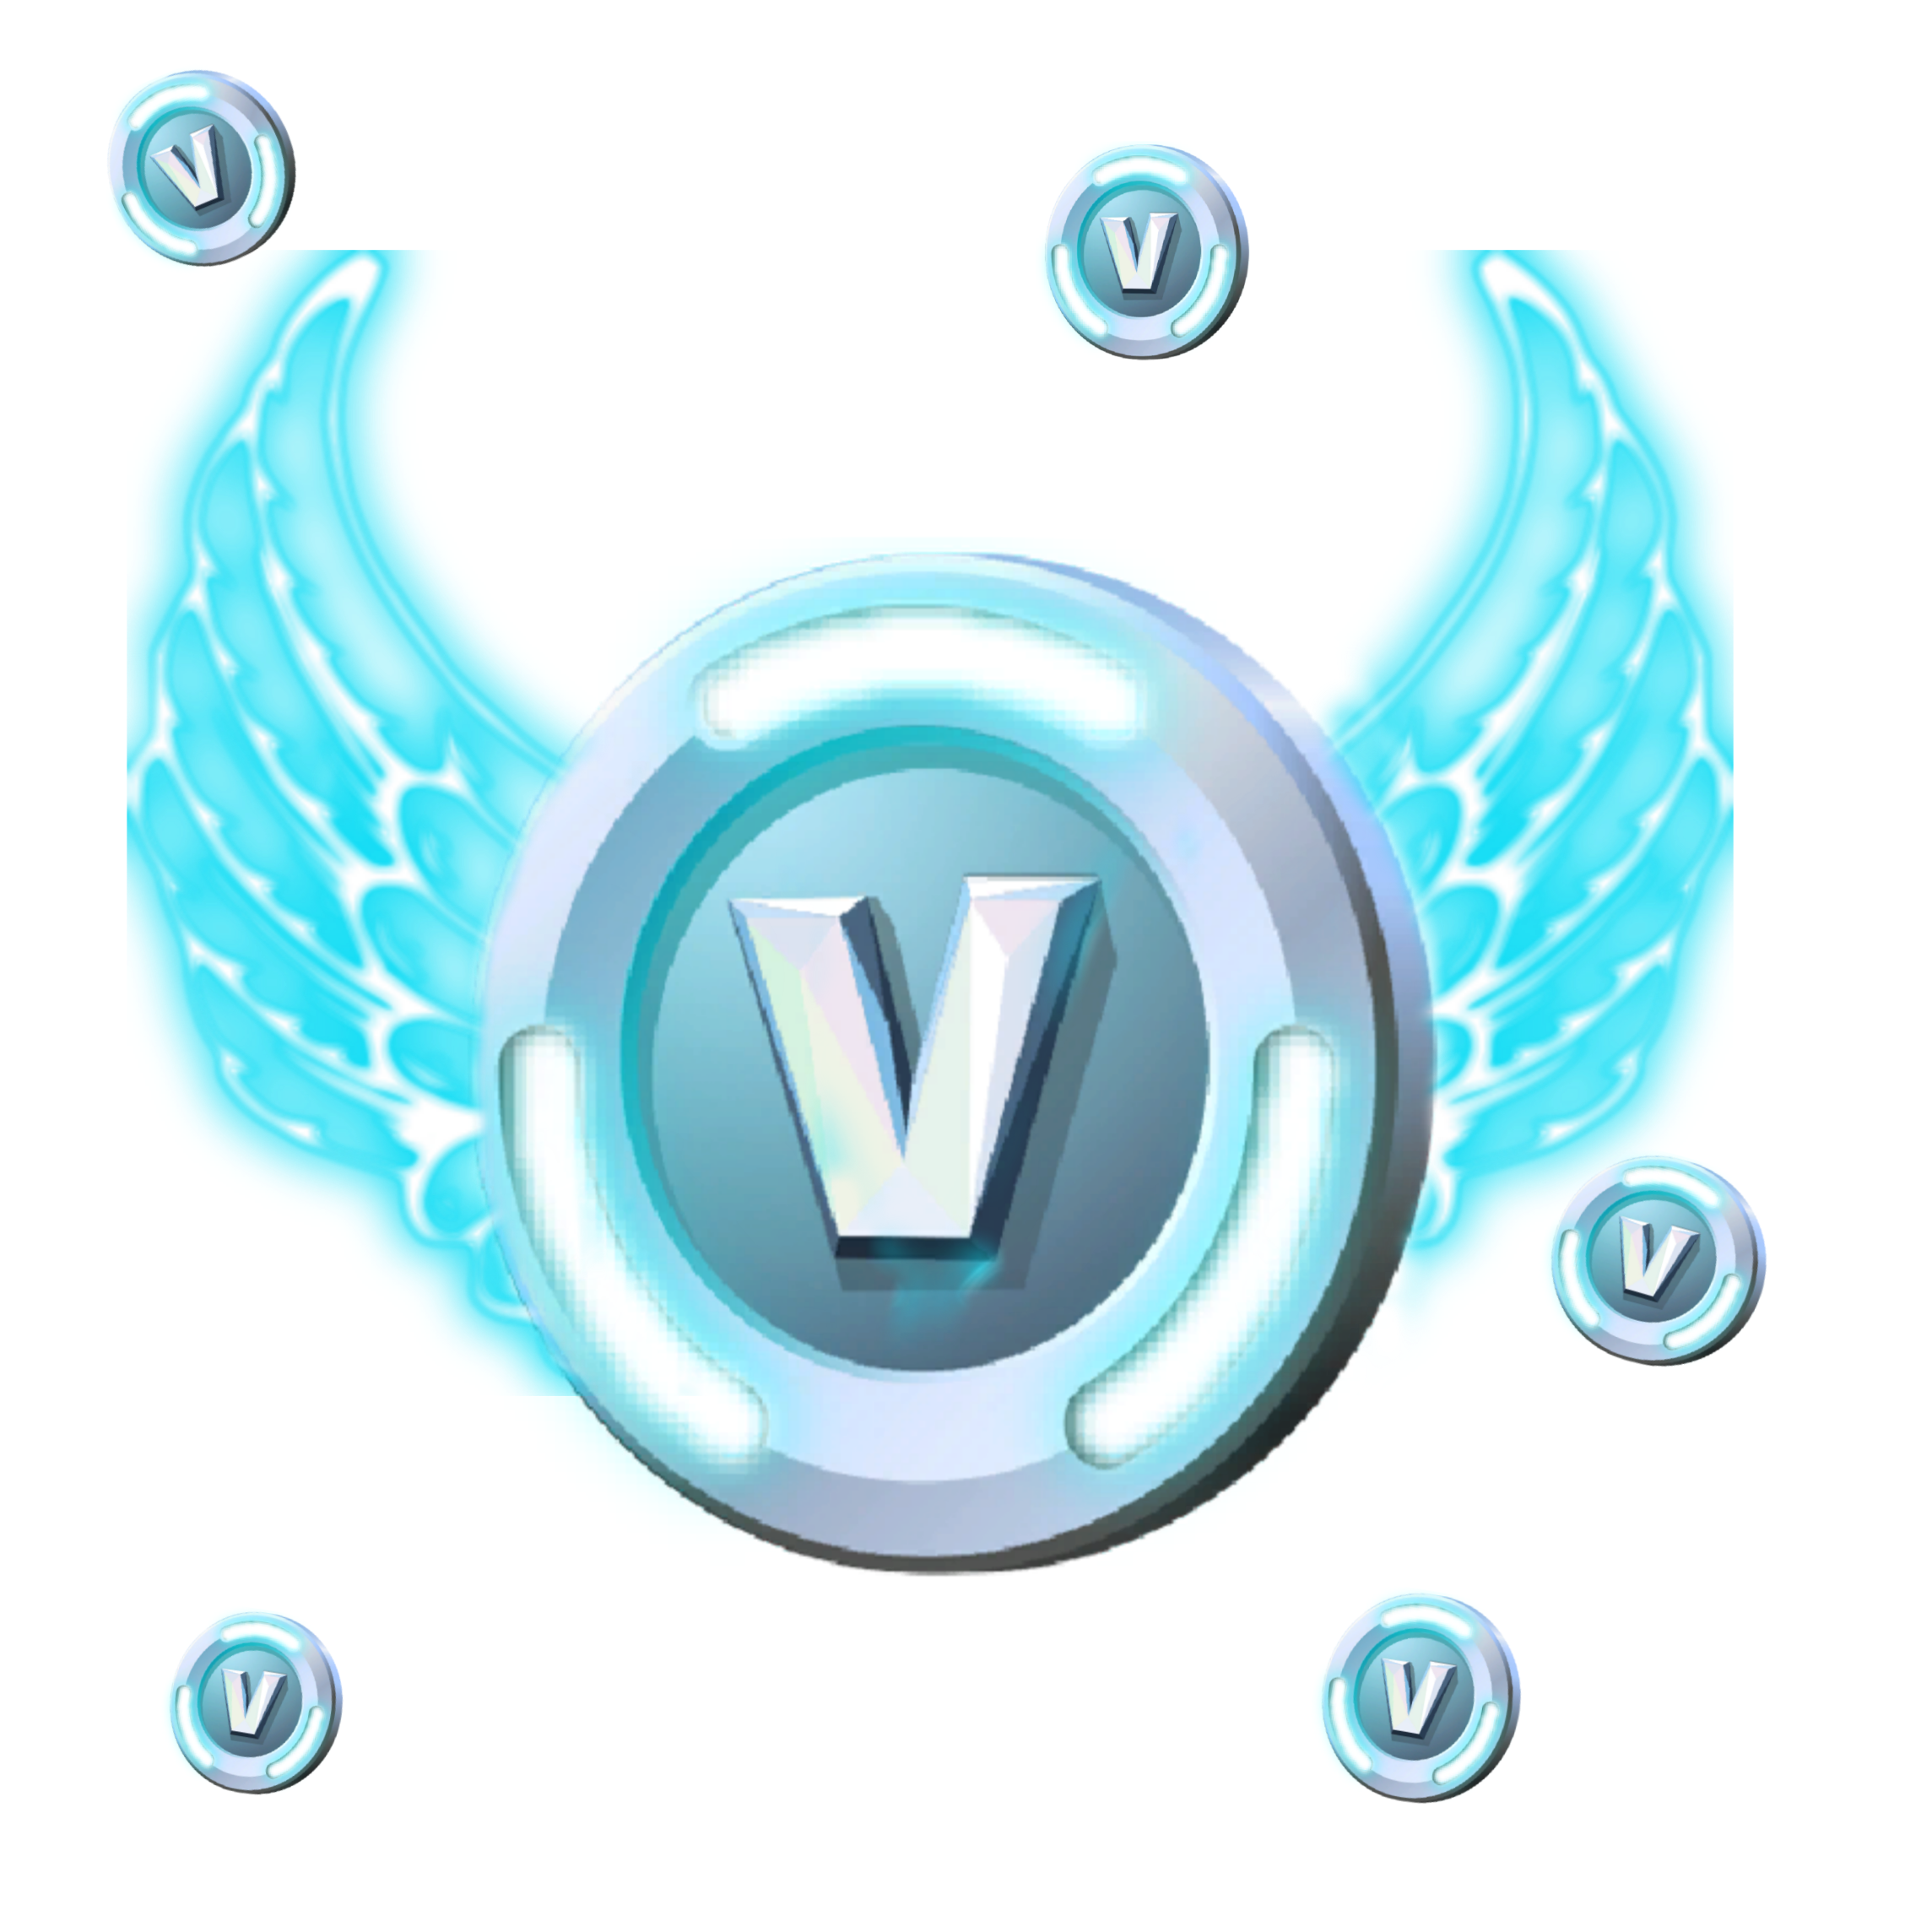 v bucks sign in to save it to your collection - v bucks sign